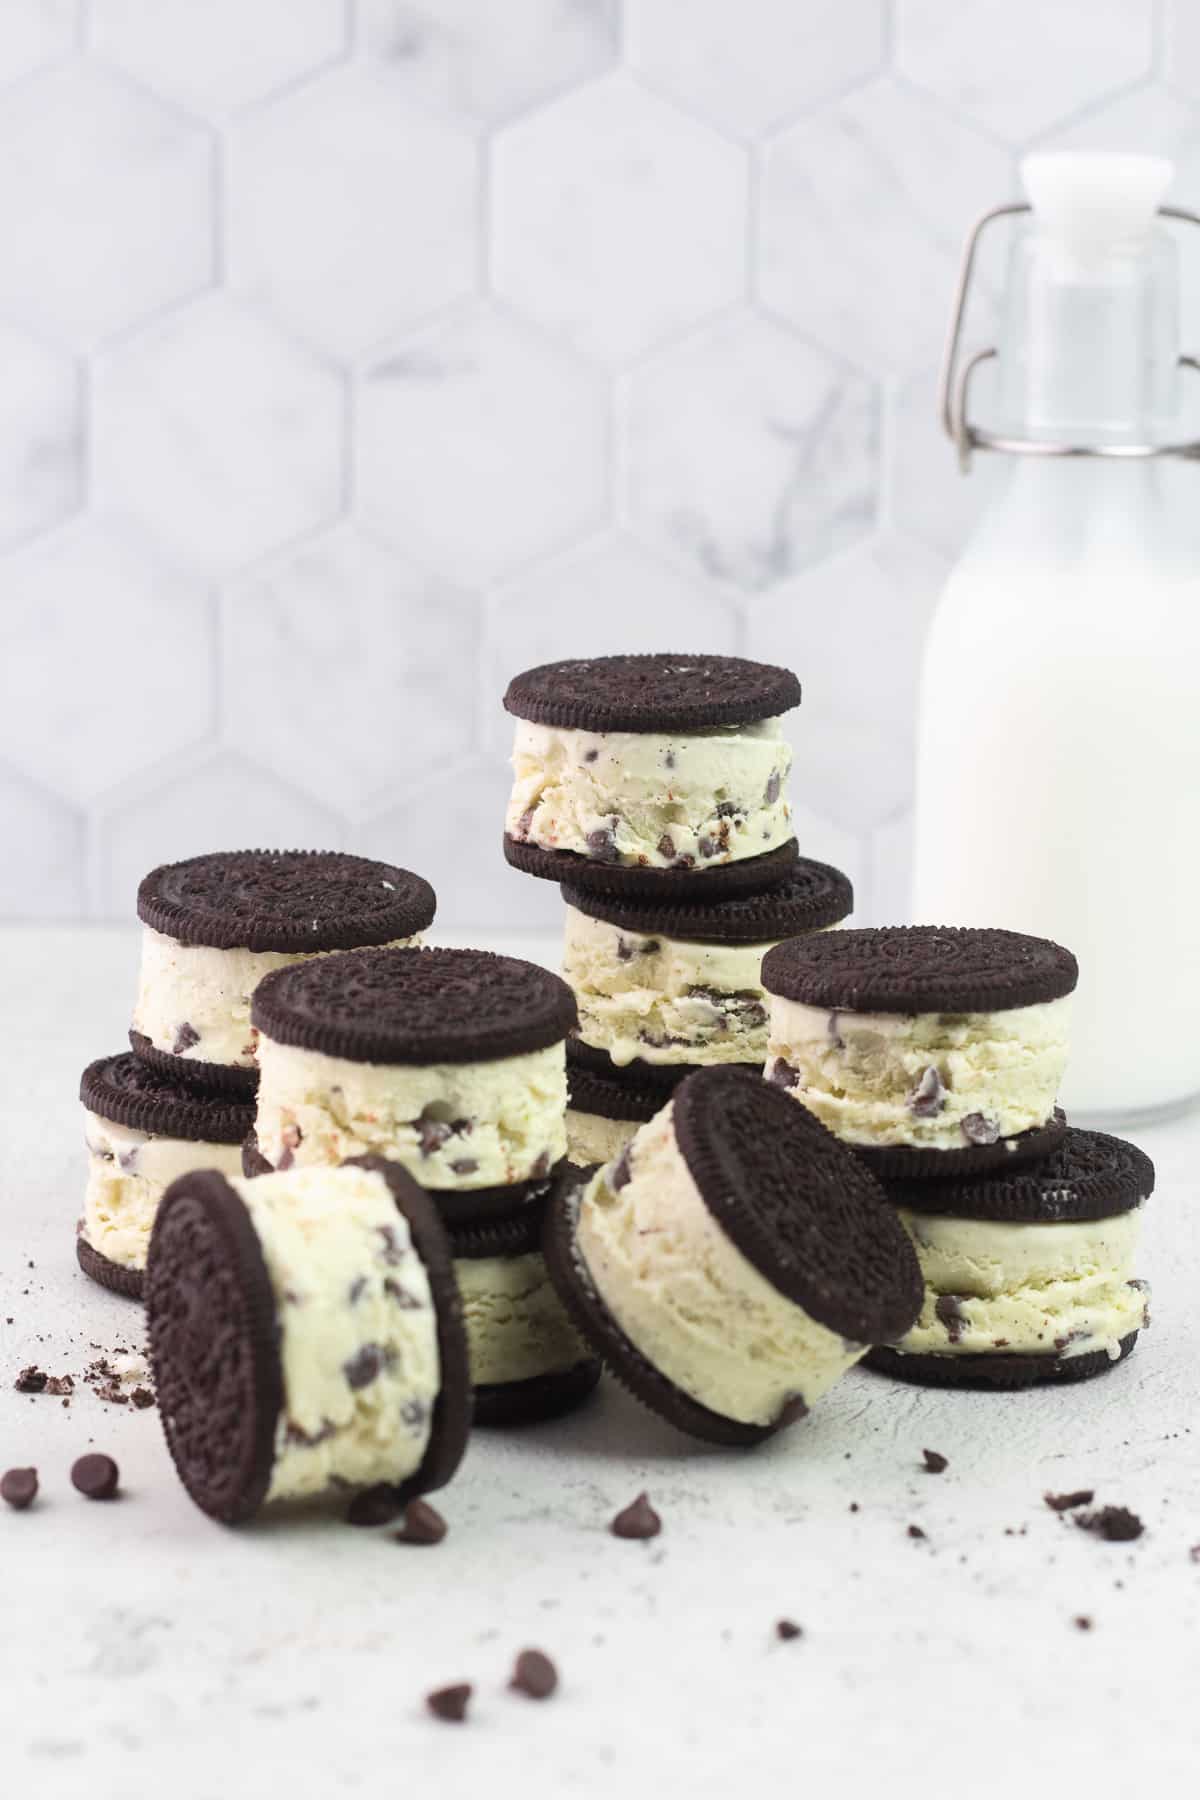 Mint Chocolate Chip Ice Cream Sandwiches with Oreo cookies